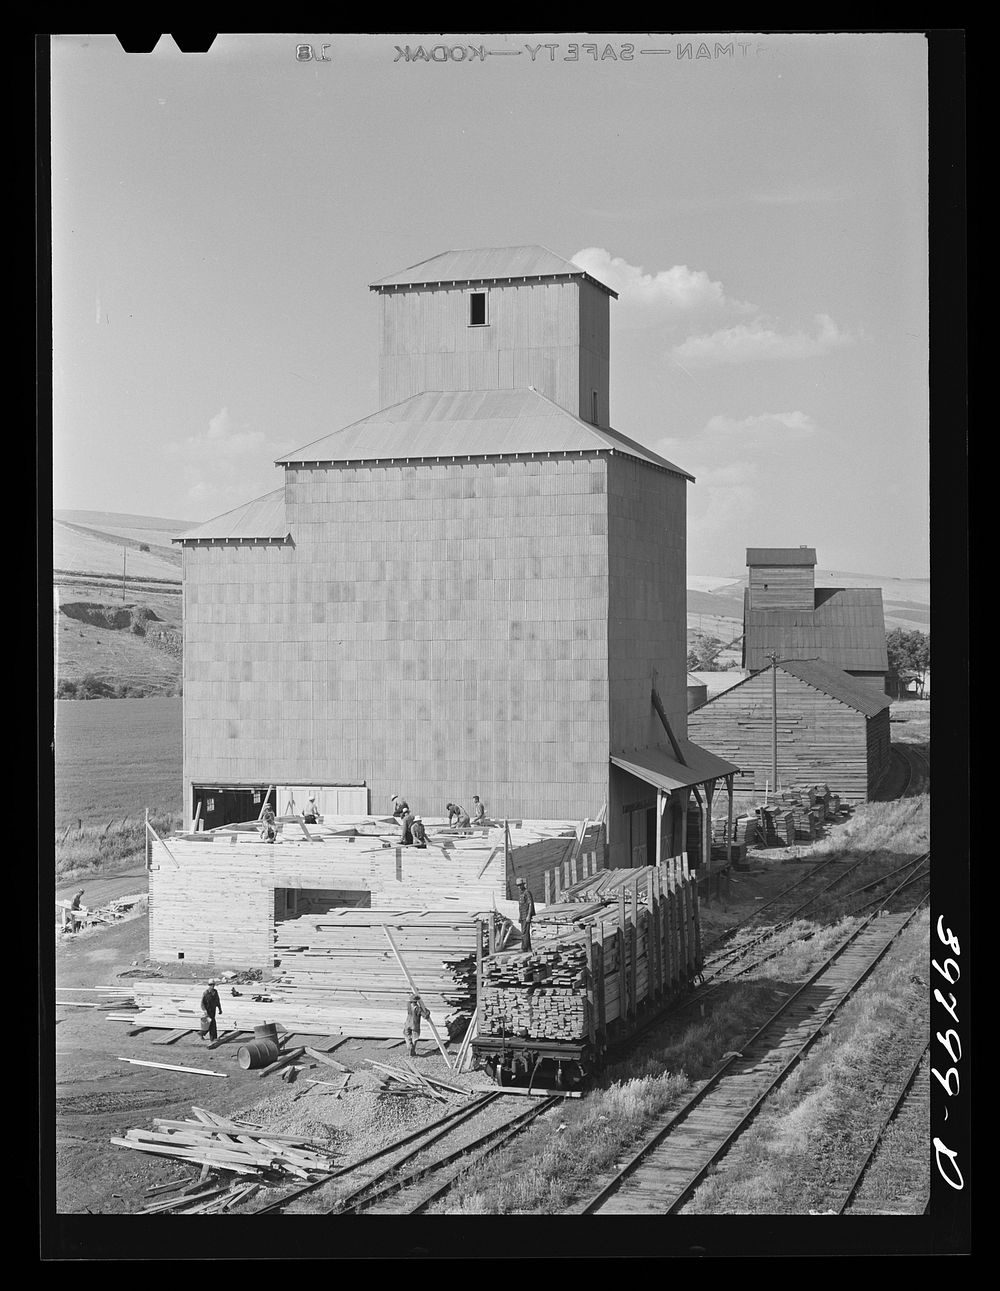 Adding new storage space to wheat elevator at Dayton, Washington. They were getting ready for a bumper crop by Russell Lee